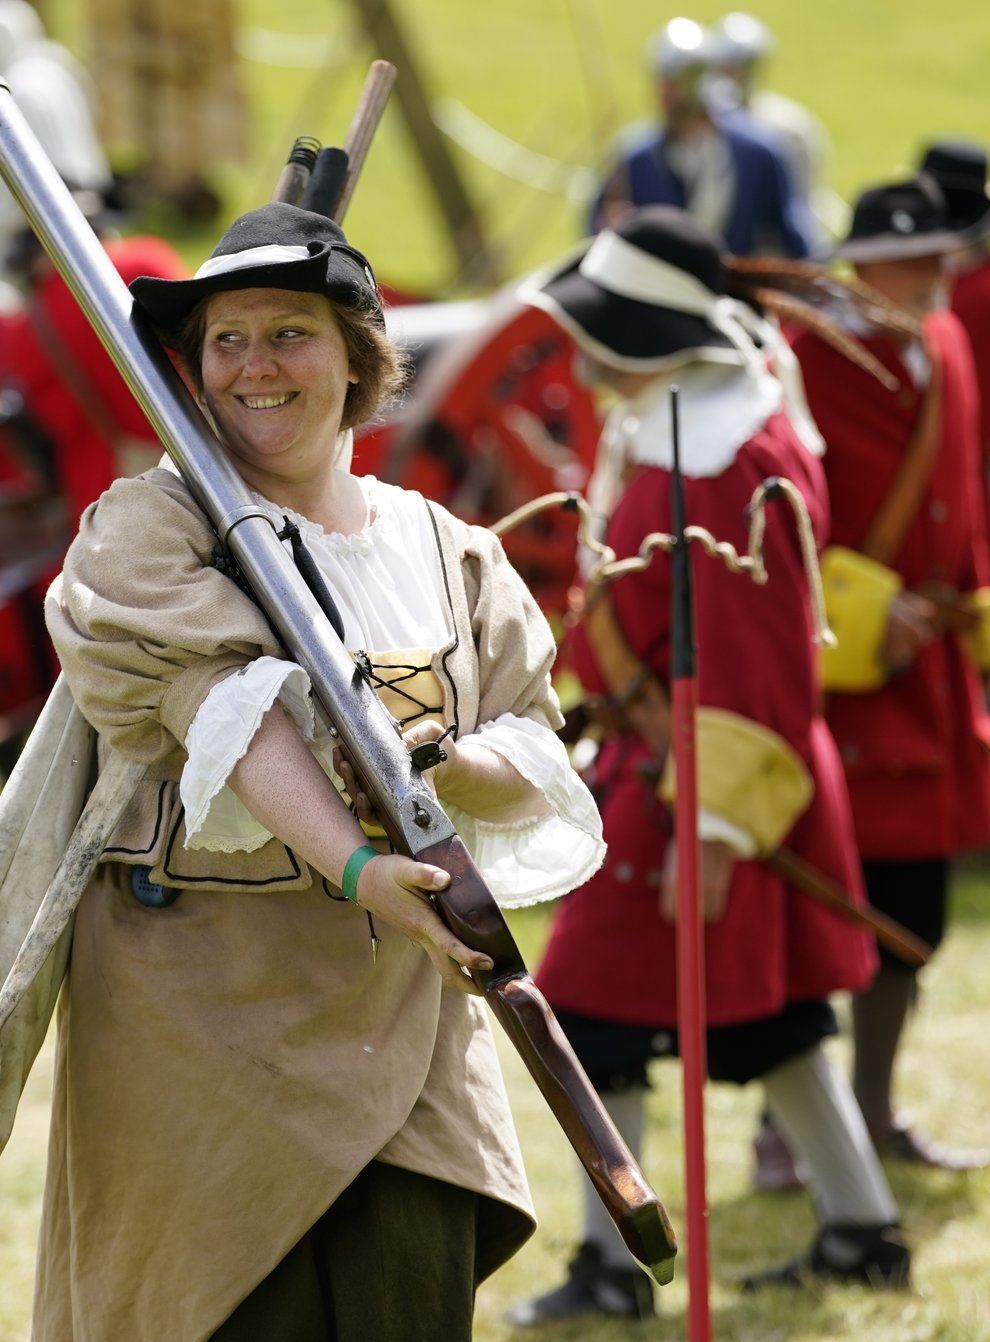 A member of the Wimborne Militia carries a rampart gun during the Chalke Valley History Festival at Broad Chalke, near Salisbury (Andrew Matthews/PA)